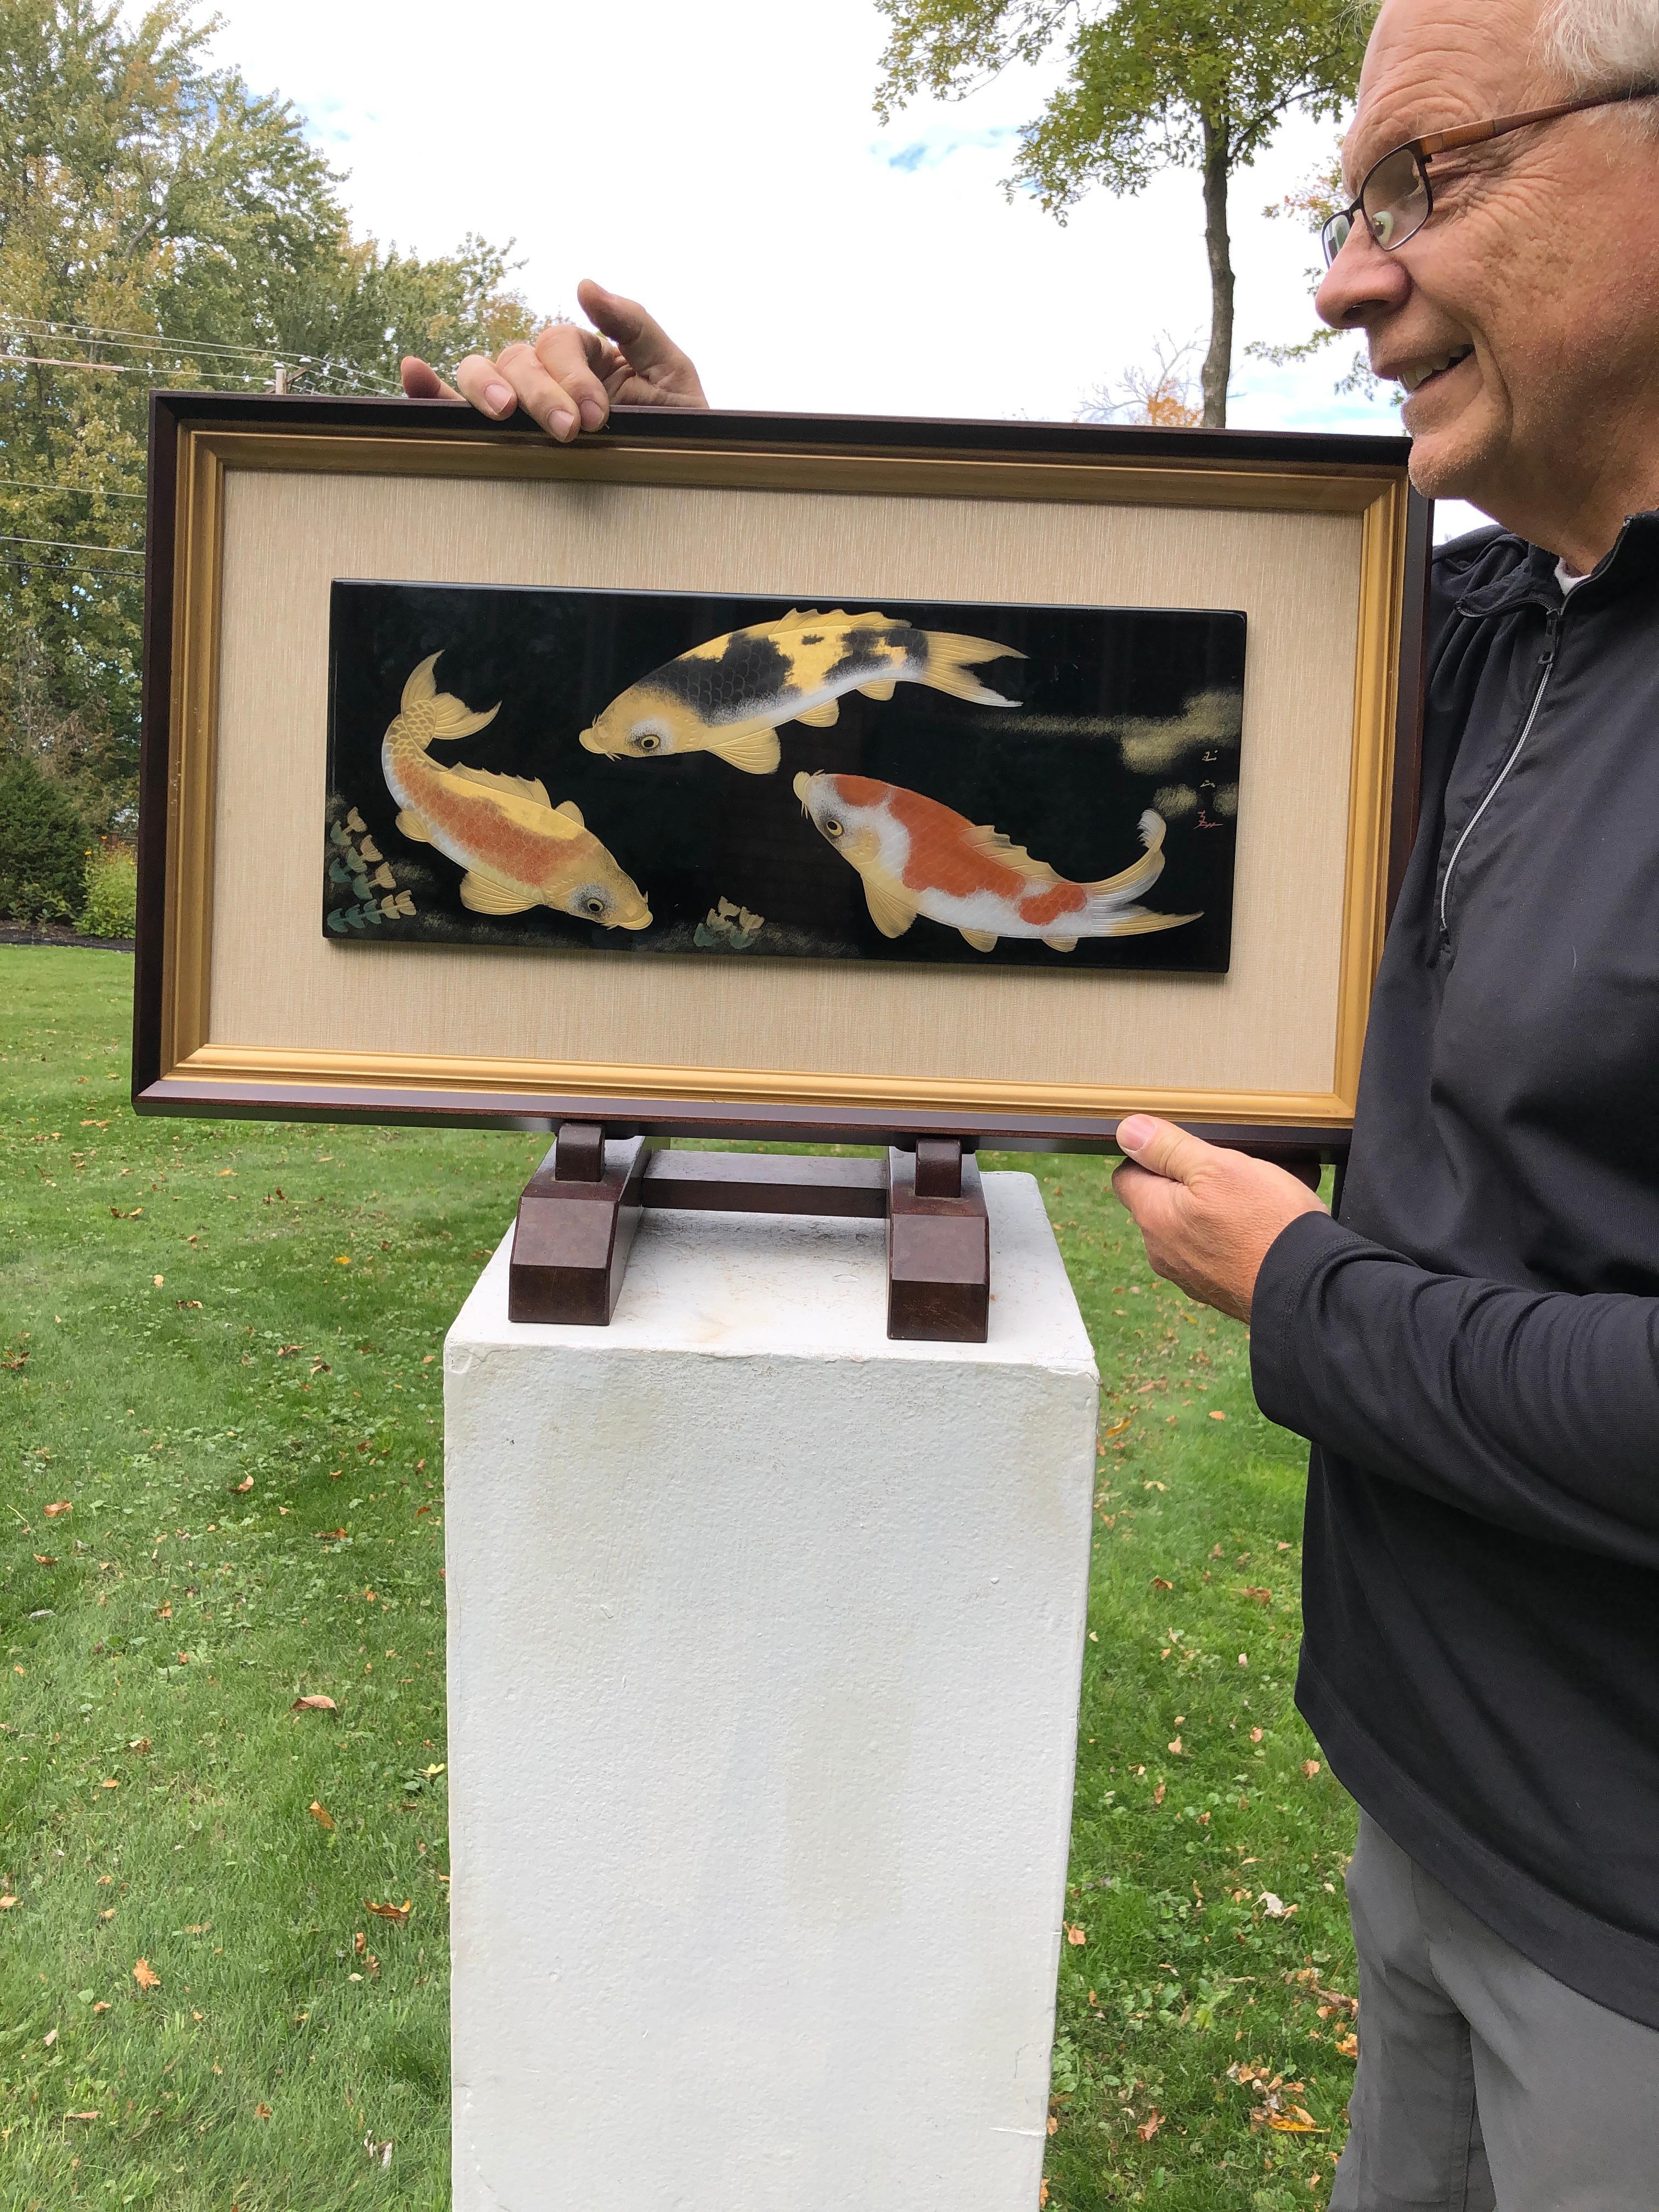 From our recent Japanese Acquisitions travels.

Stunning Artisan Creation.

A superb Makie Lacquer framed panel of three koi - beautifully rendered by a master Japanese artisan. Three rich black and gold Koi are hand drawn gracefully plying